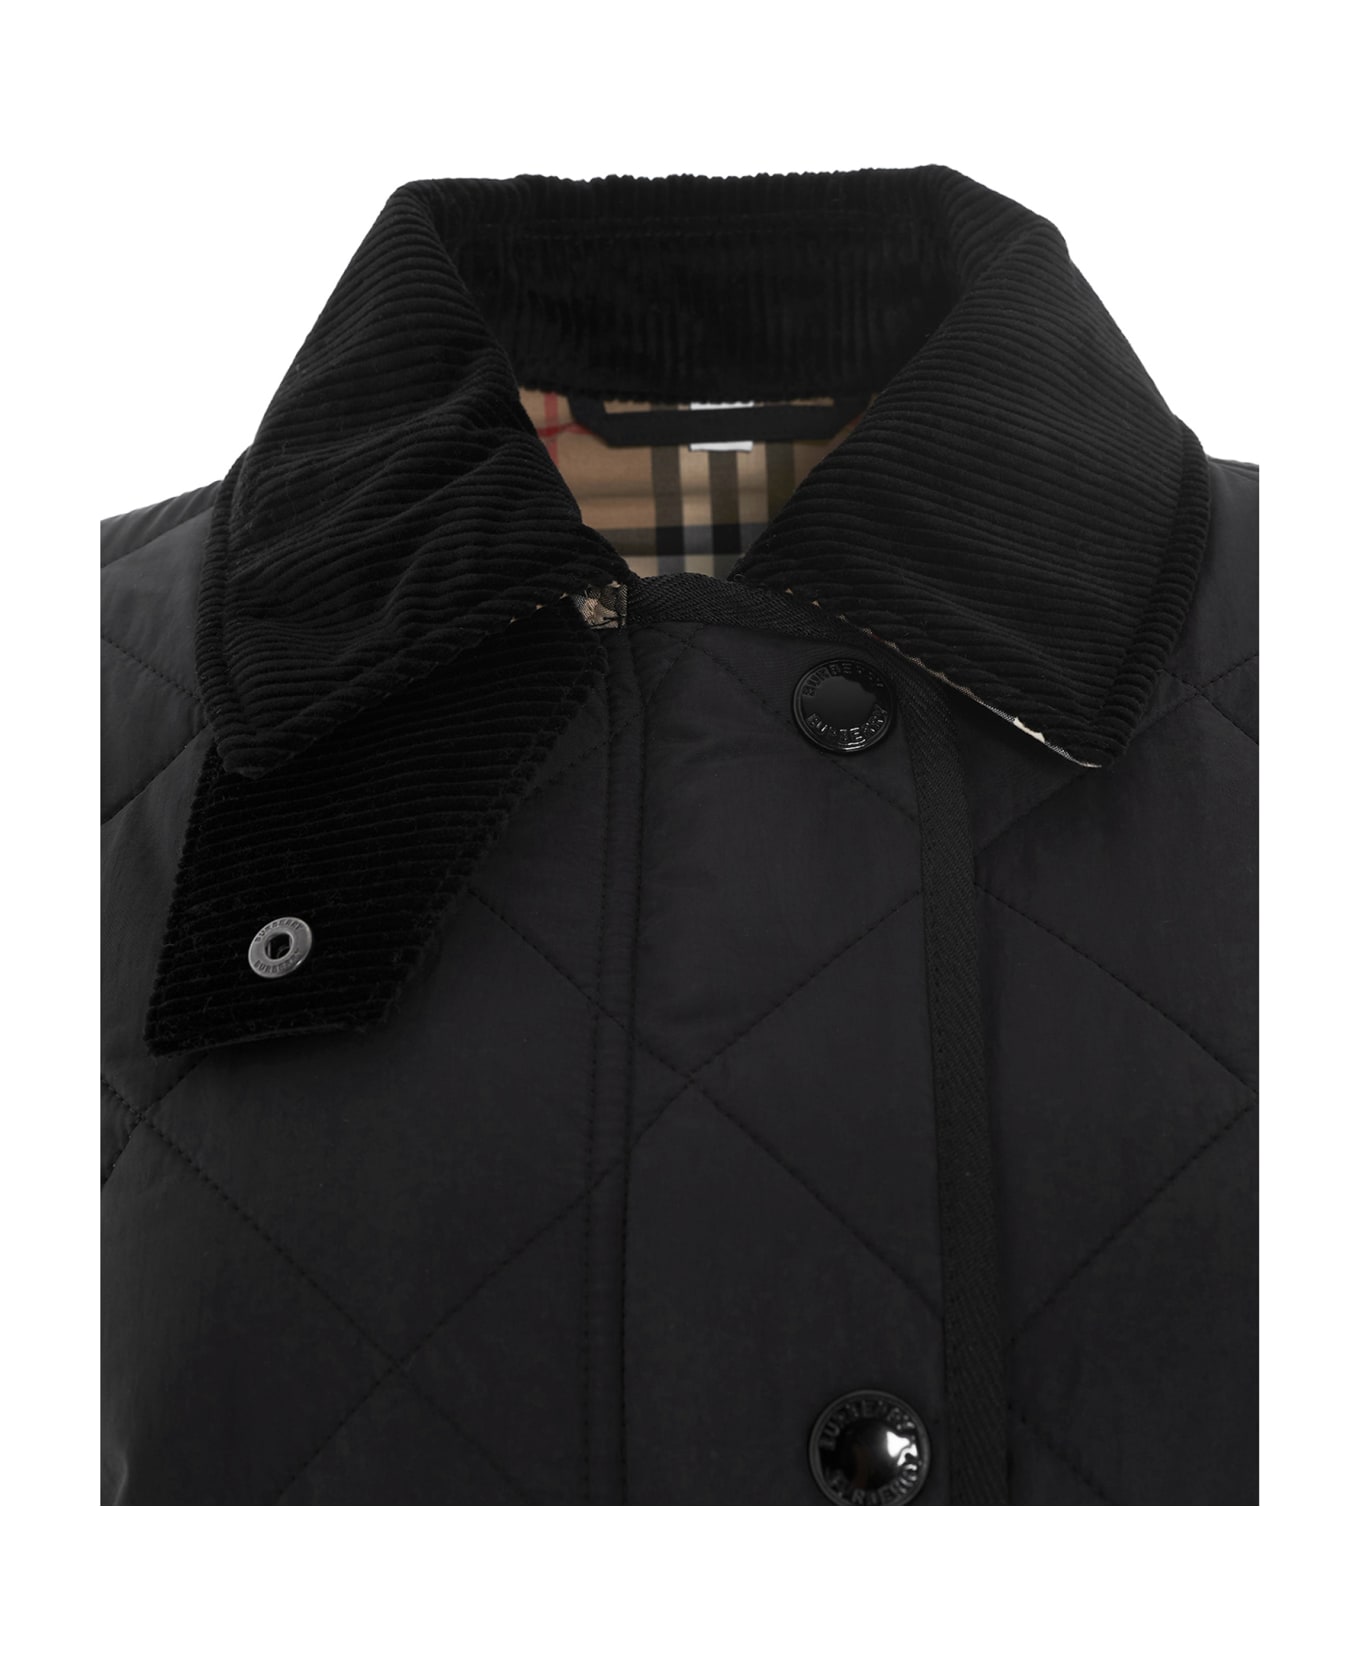 Burberry Quilted Jacket 'cotswold' - Black